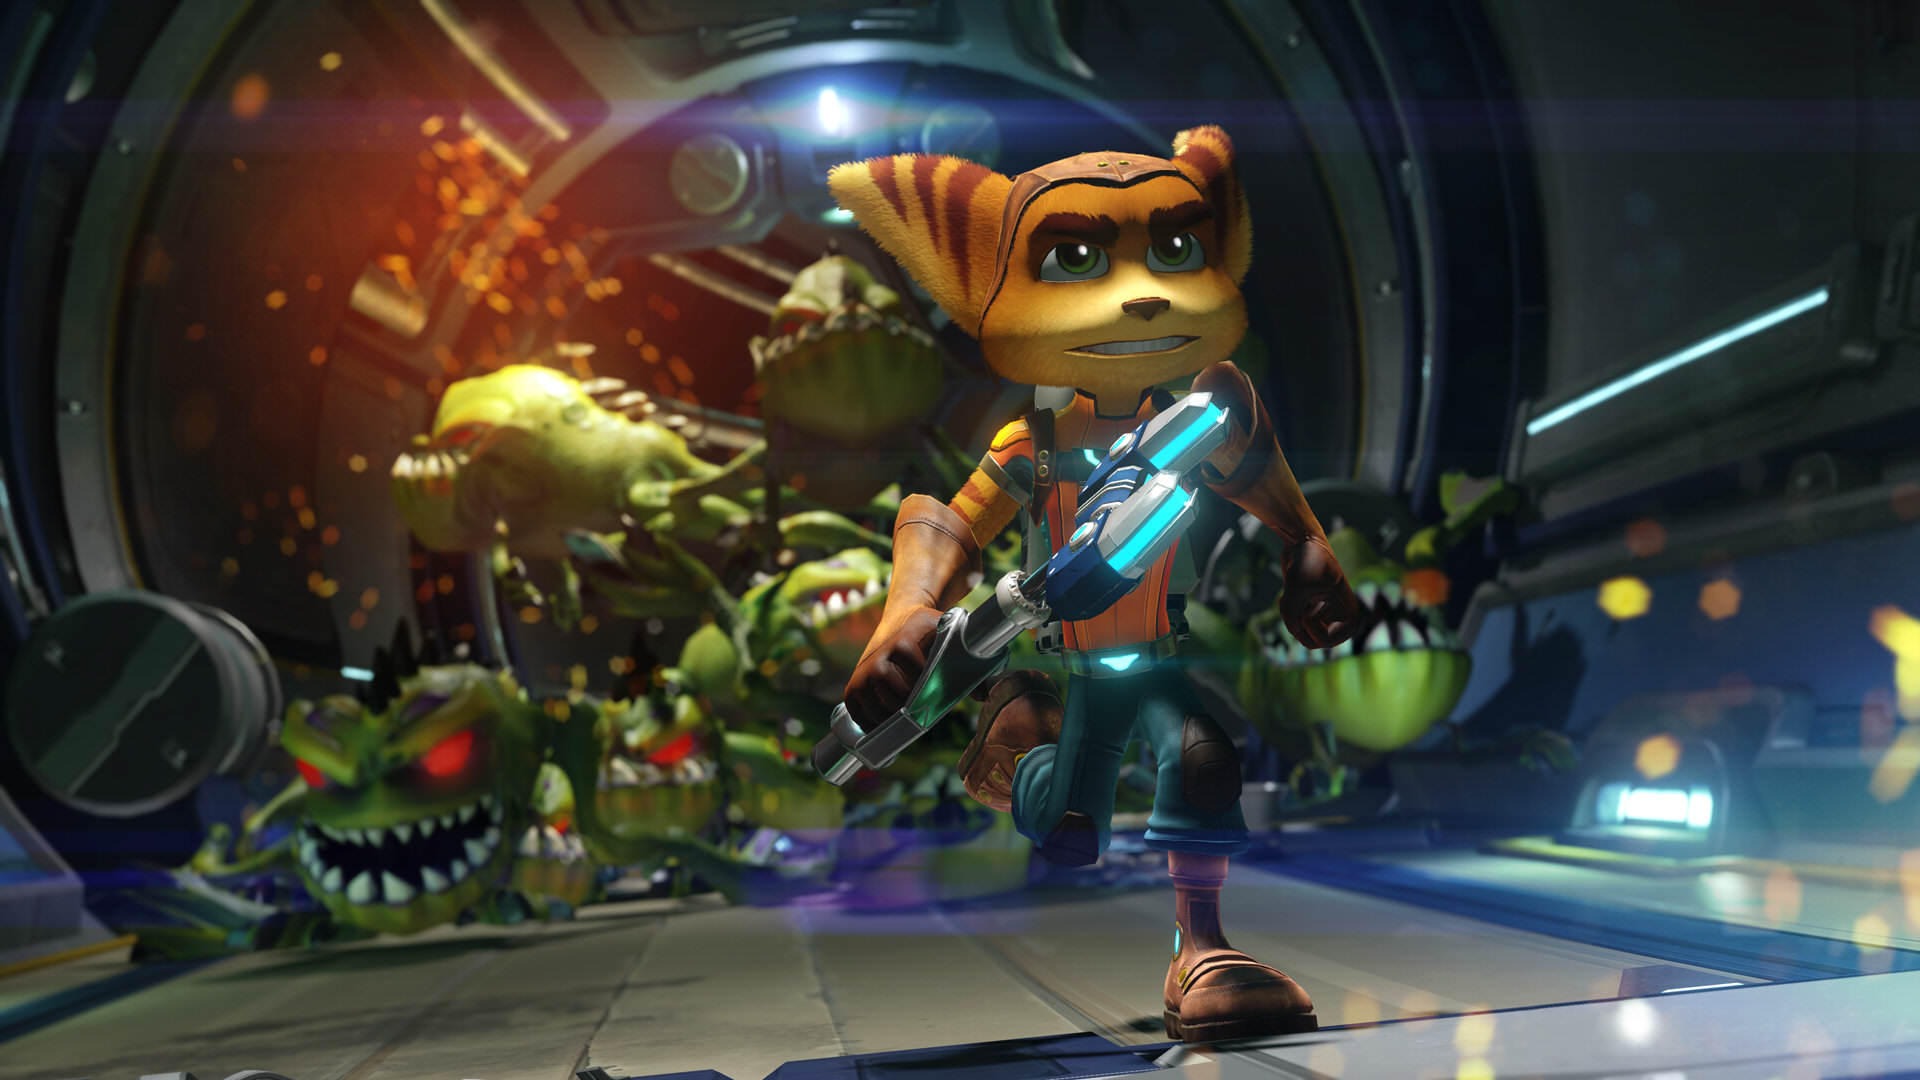 Game: Ratchet Clank Series Review